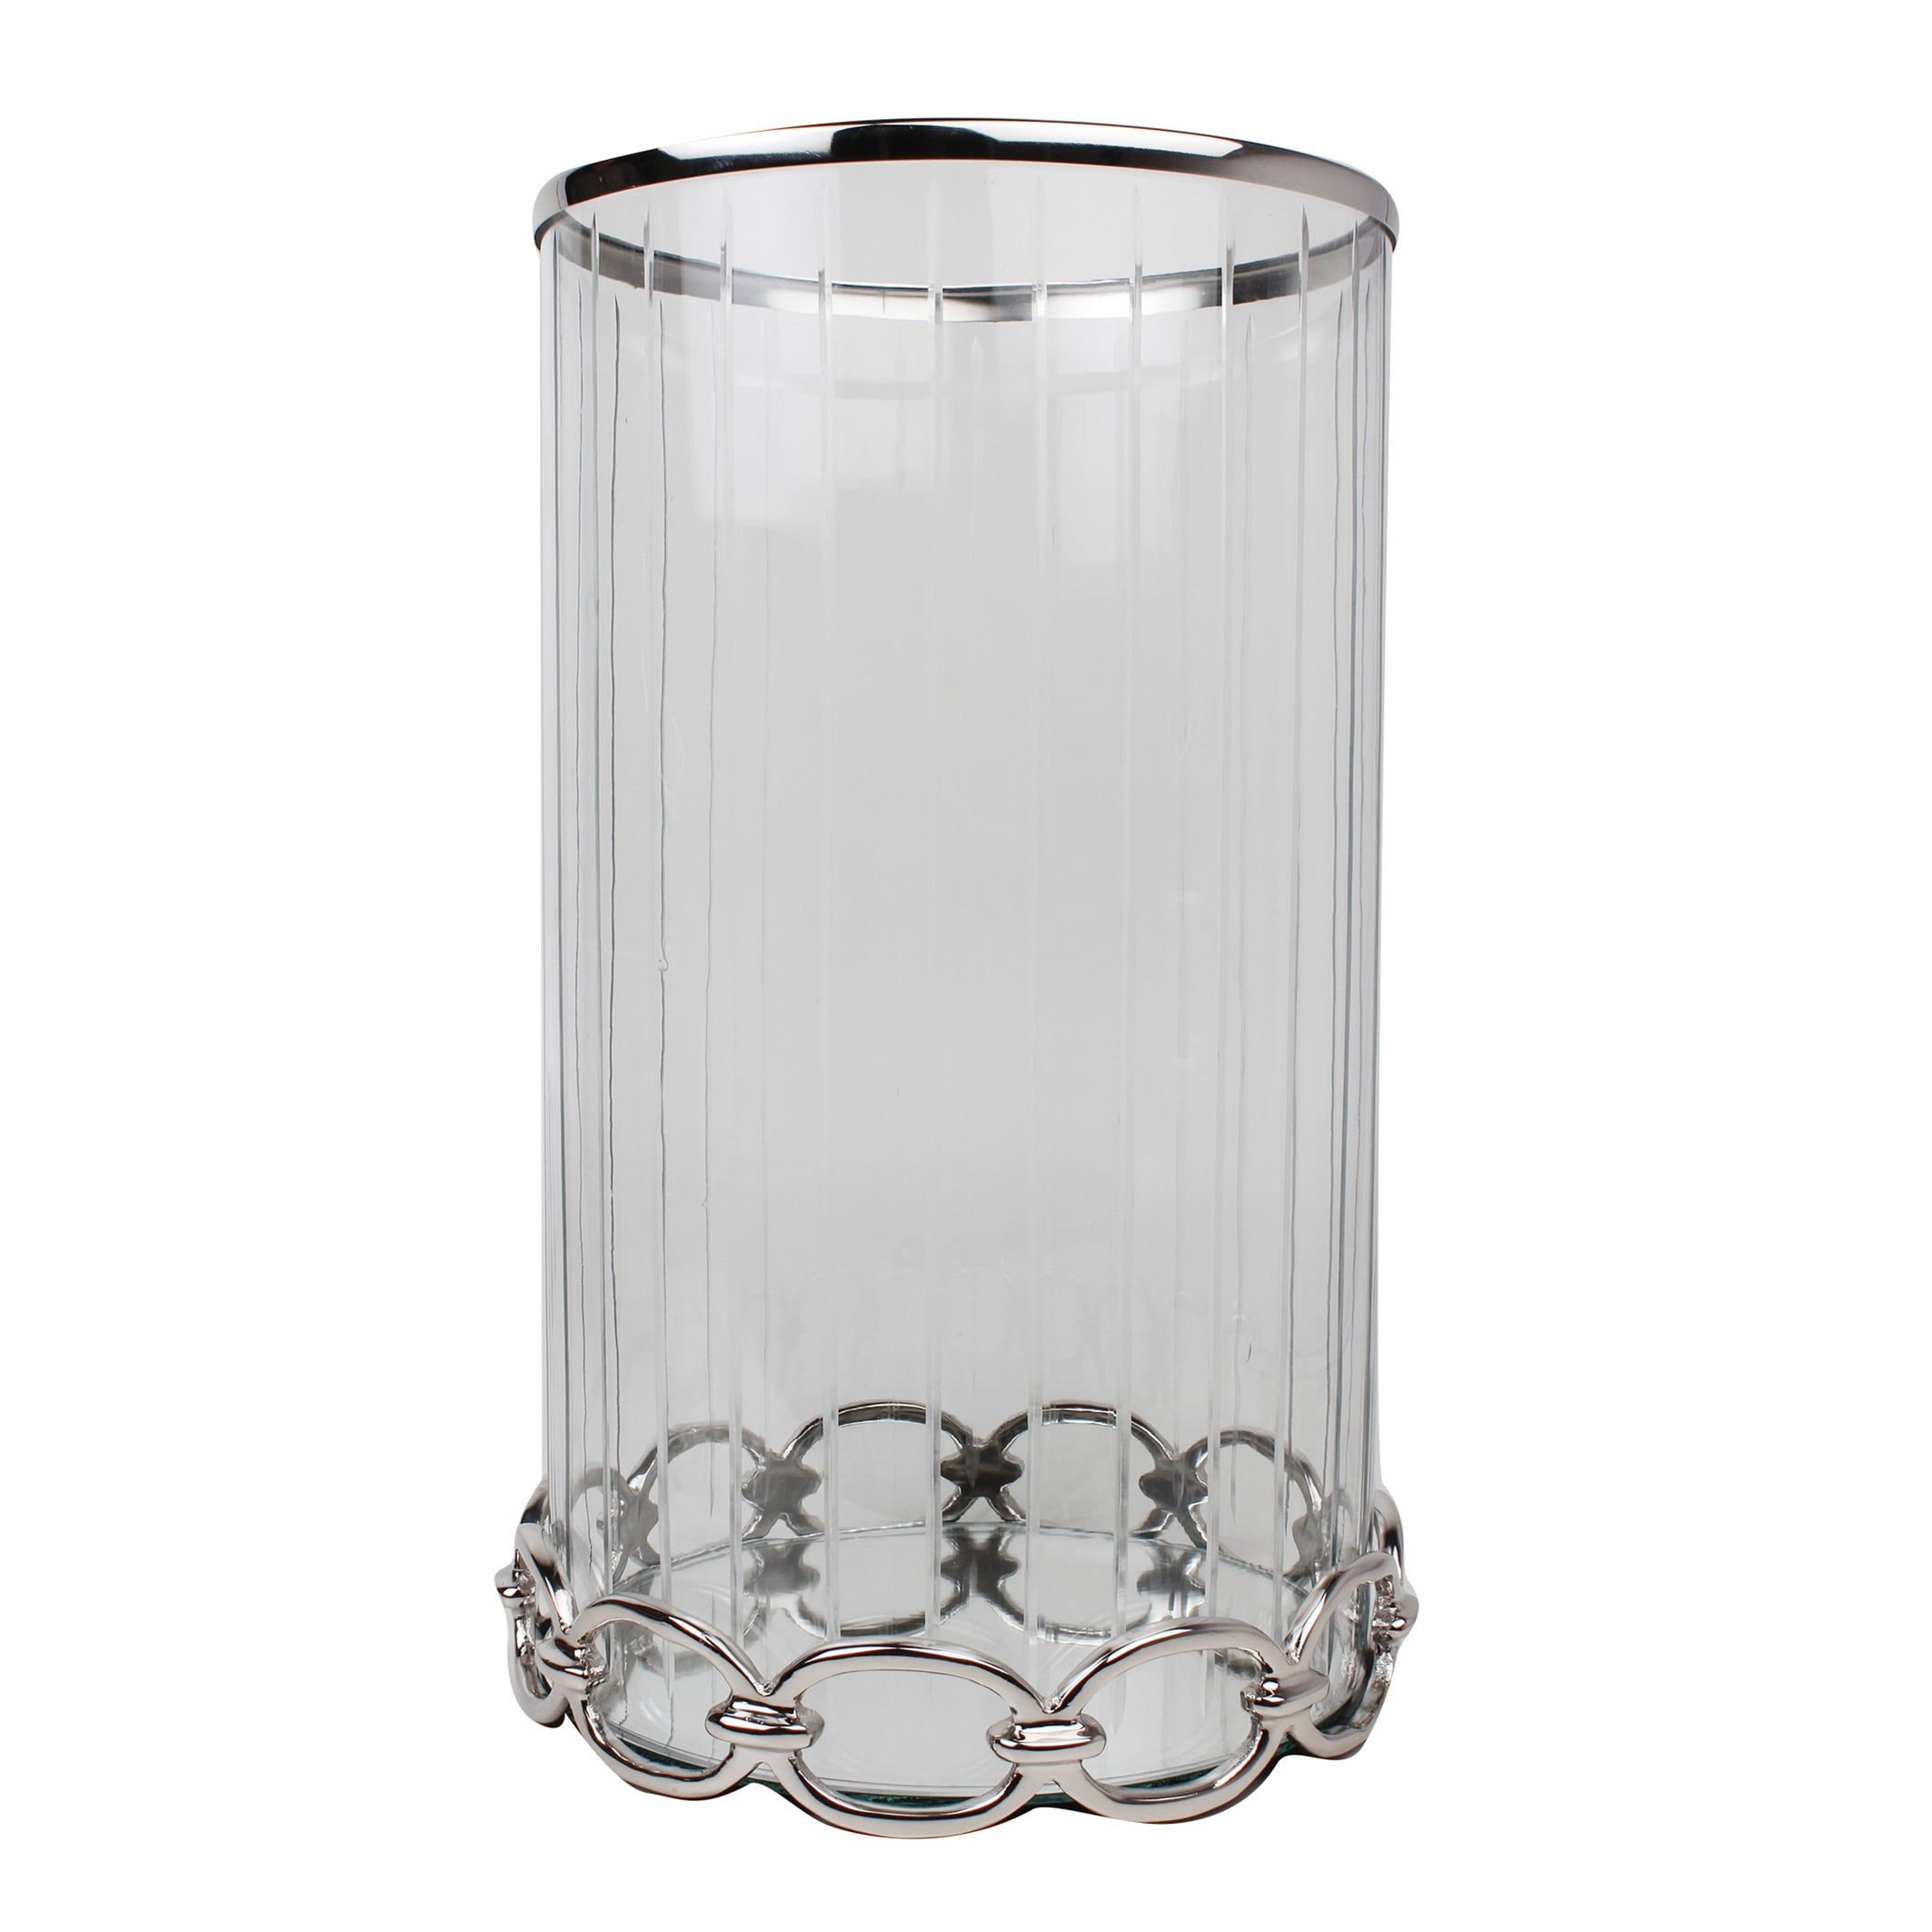 Glass Candlestick Holders with Silver Rim